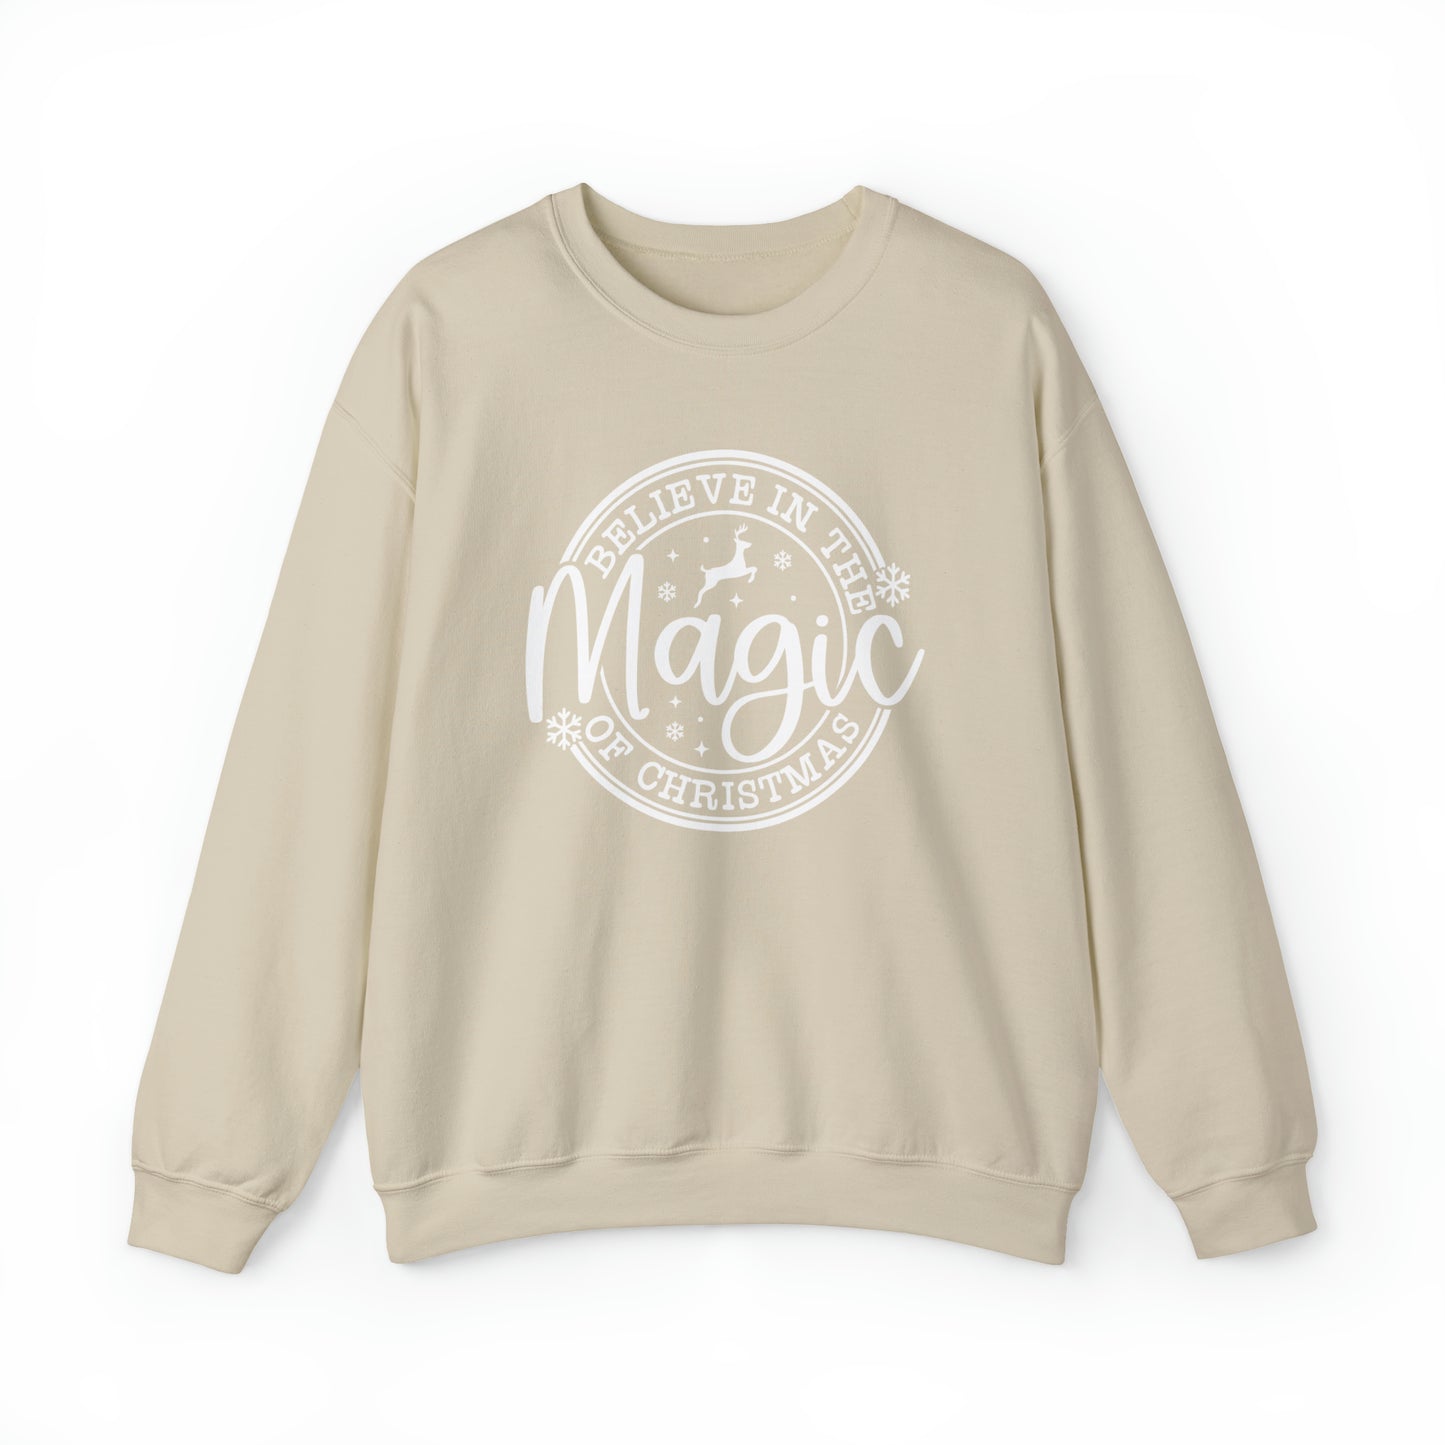 Believe in the Magic of Christmas Crewneck Sweater